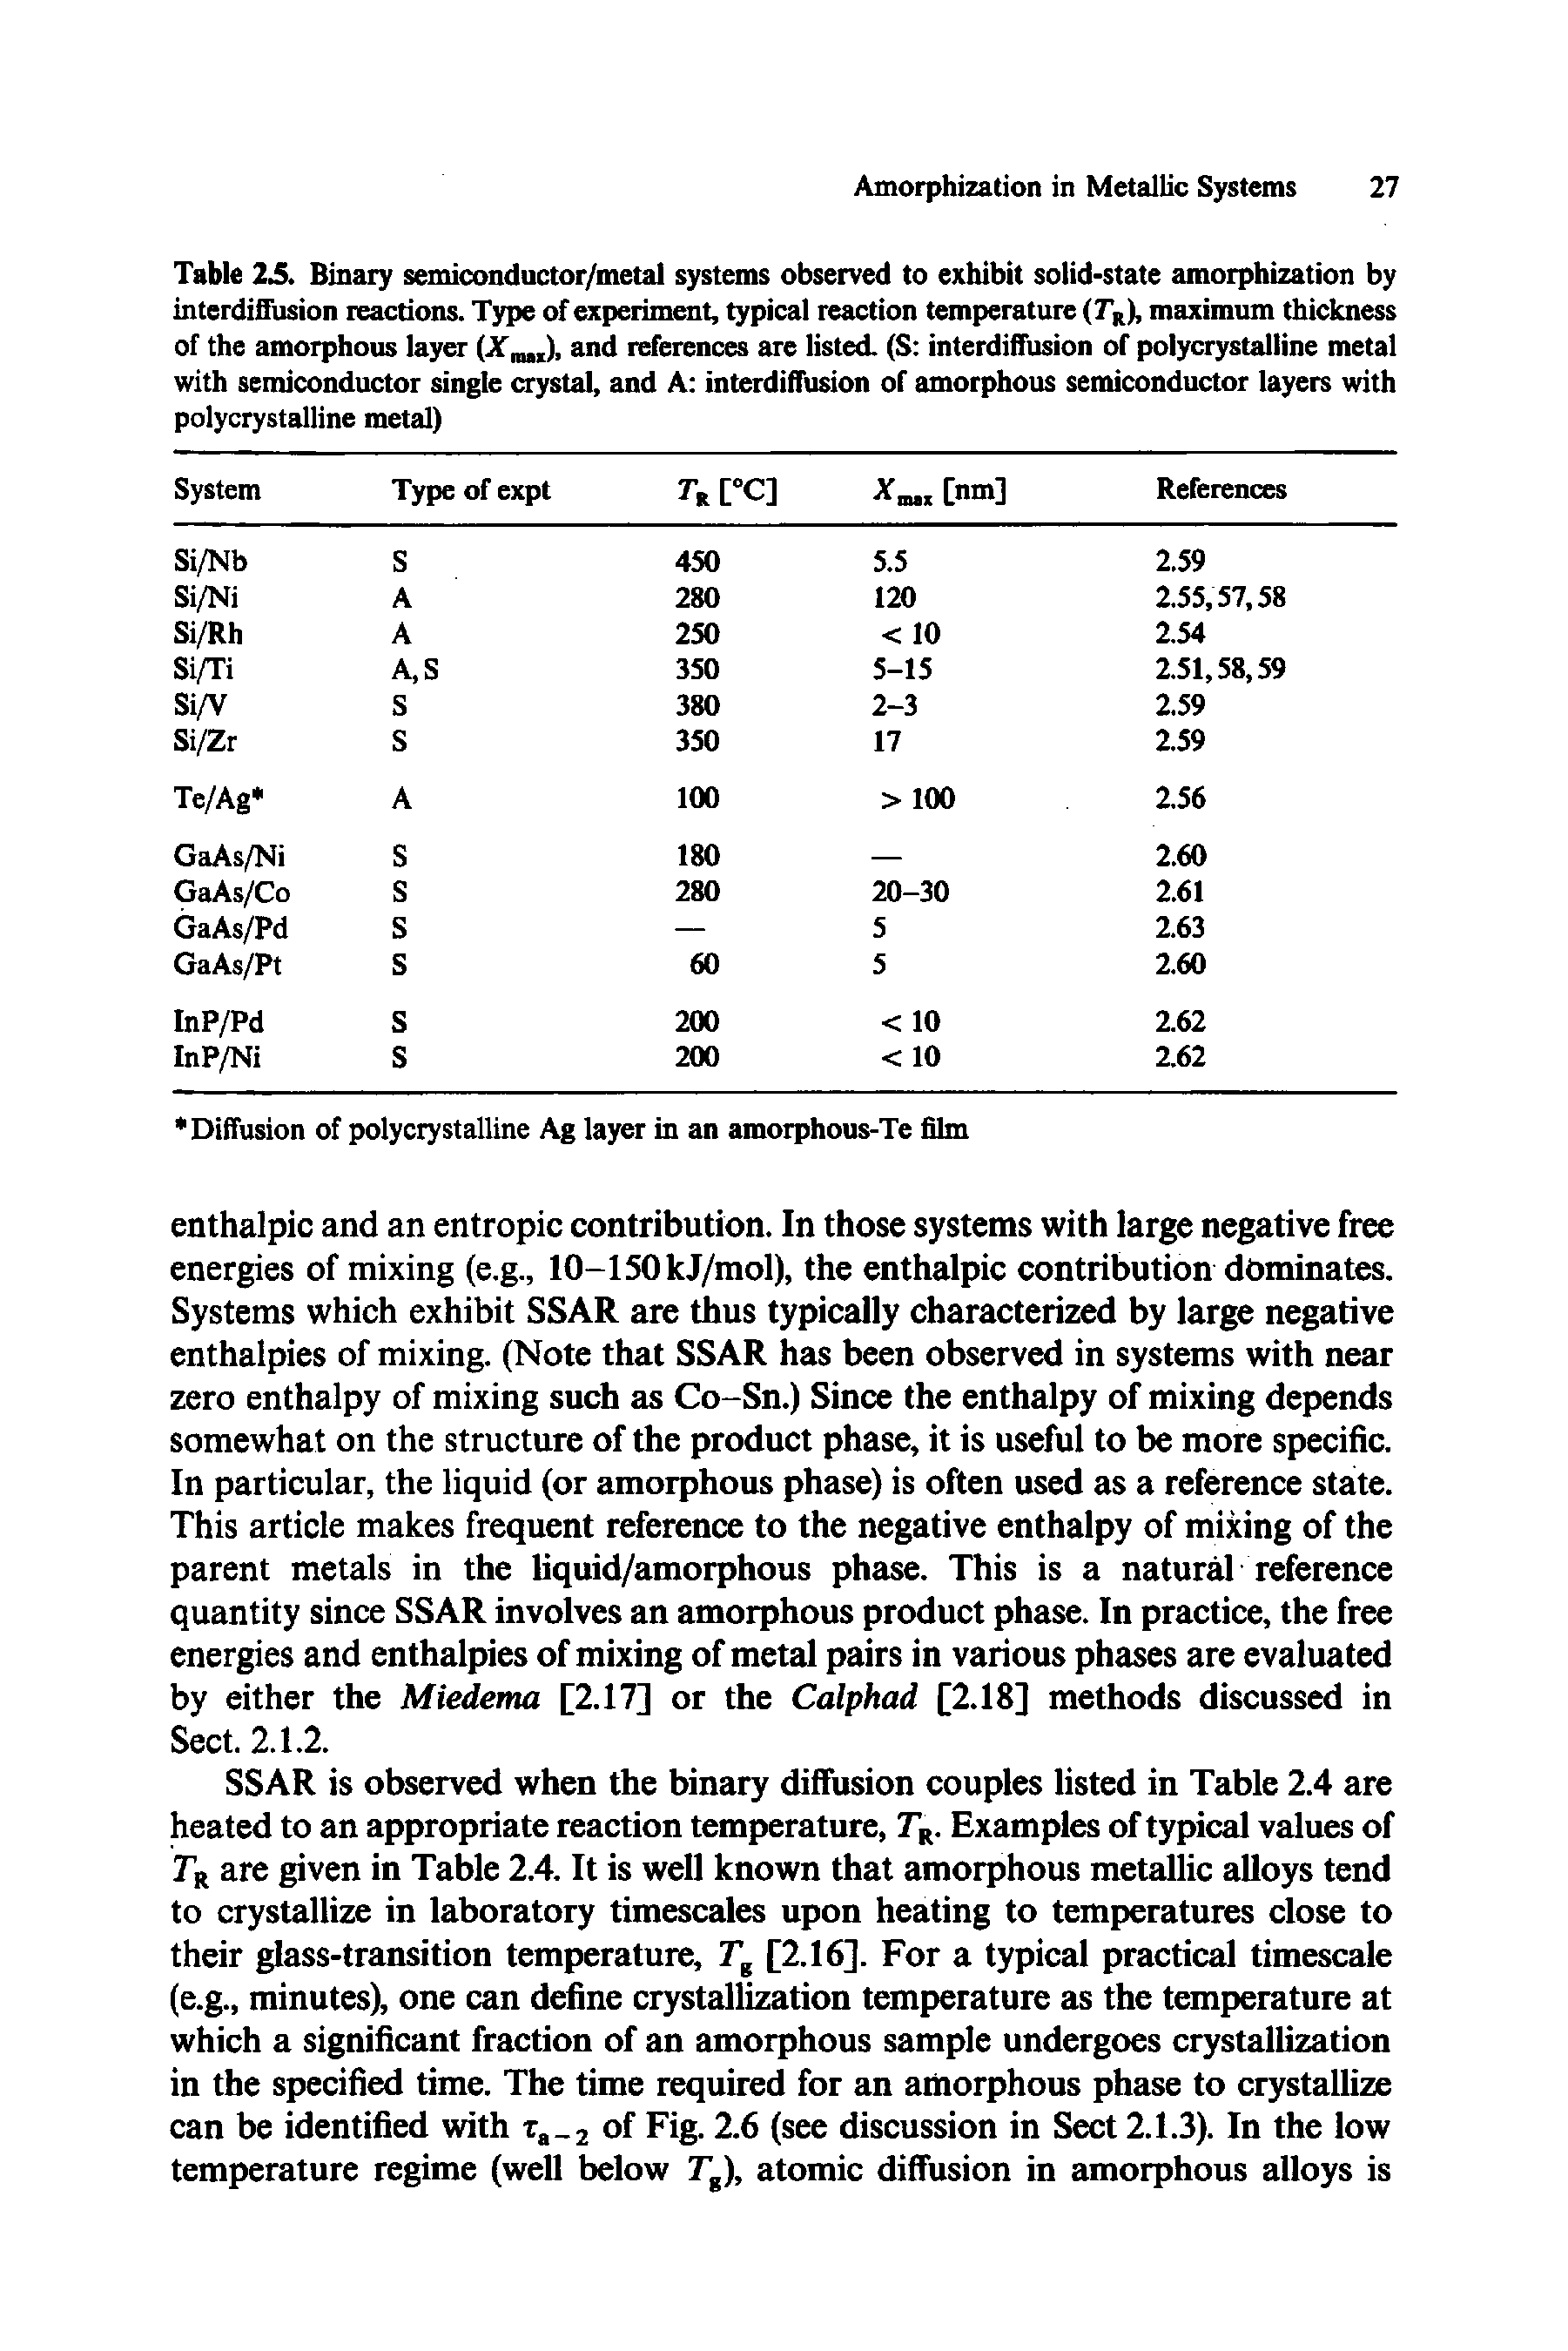 Table 2.5. Binary semiconductor/metal systems observed to exhibit solid-state amorphization by interdifiiision reactions. Type of experiment, typical reaction temperature (rR), maximum thickness of the amorphous layer (2f and references are listed. (S interdiffusion of polycrystalline metal with semiconductor single crystal, and A interdiffusion of amorphous semiconductor layers with polycrystalline metal)...